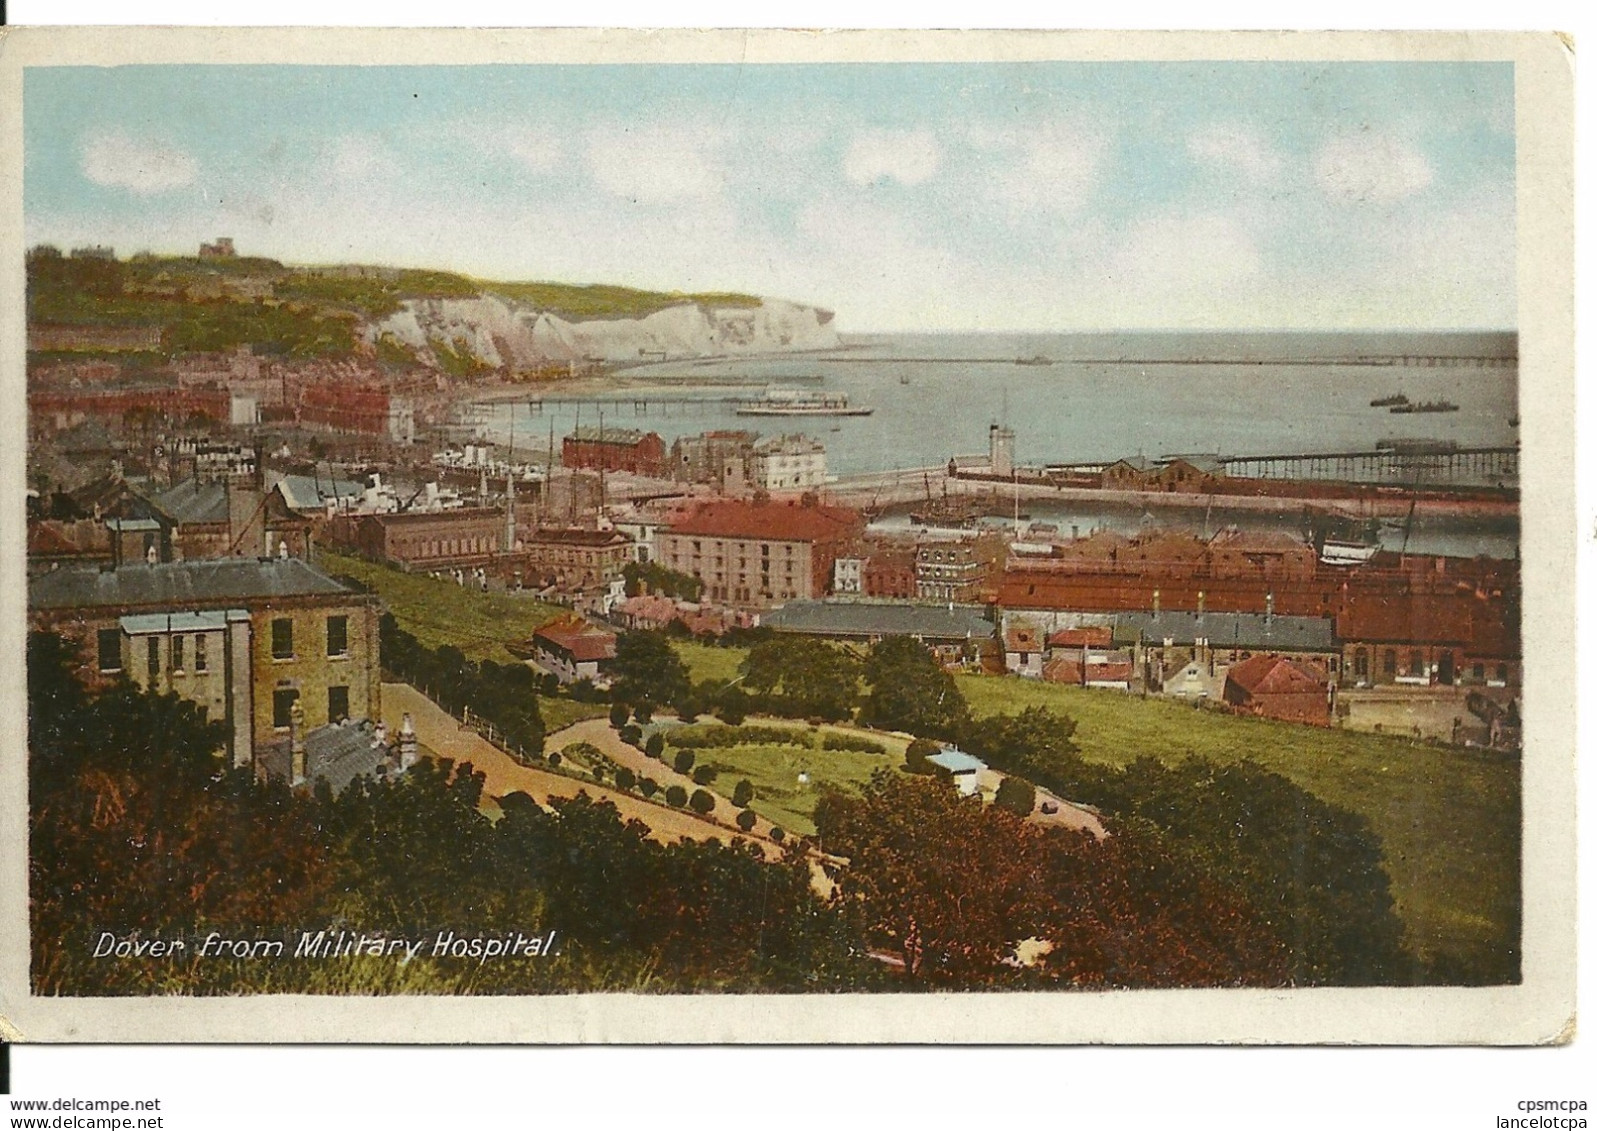 DOVER FROM MILITARY HOSPITAL - Dover